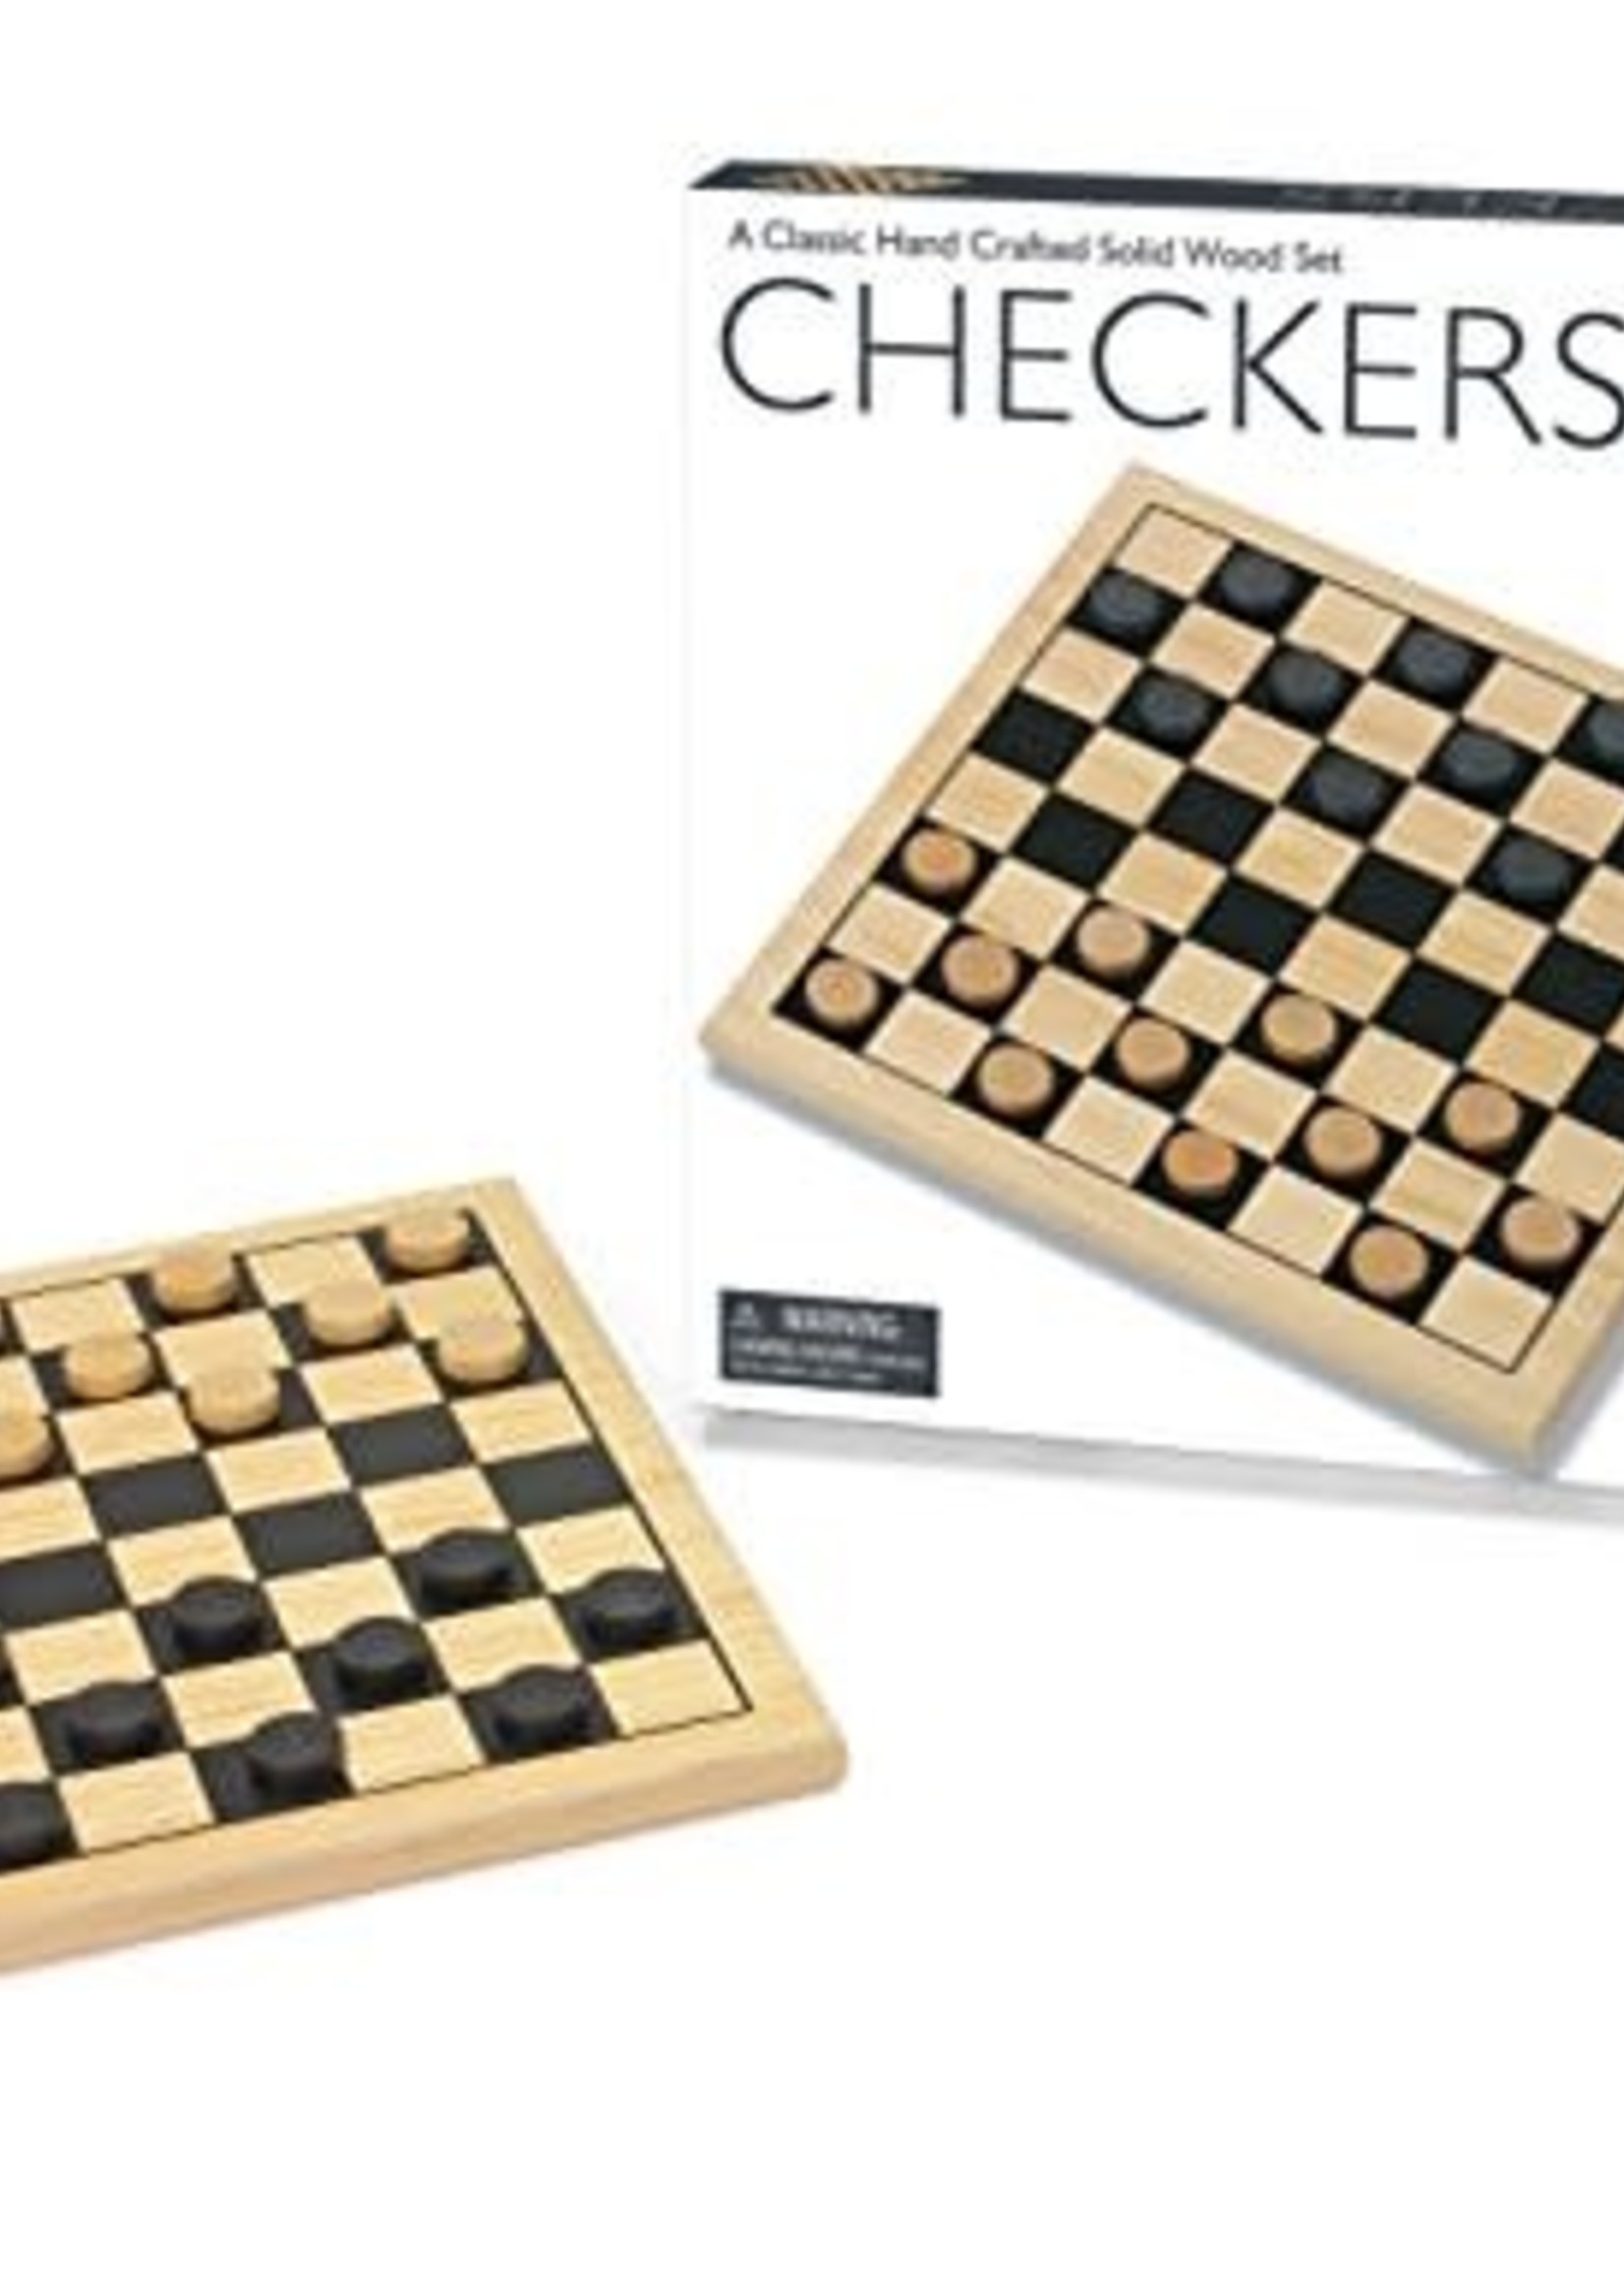 New Entertainment A classic hand crafted solid wood set Checkers